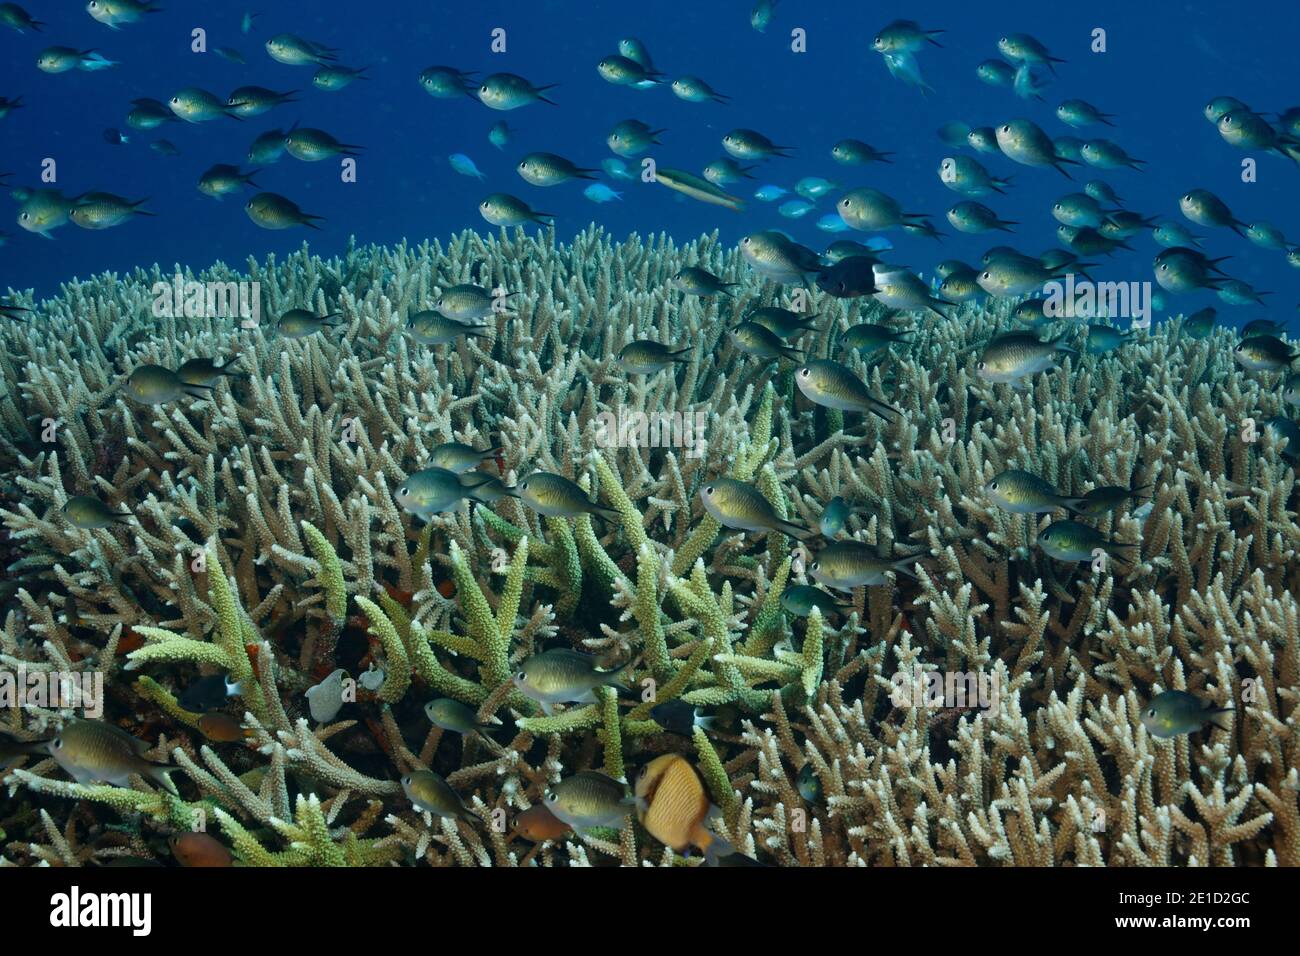 school of Chromis fish swimming aboveÃ‚Â staghorn coralÃ‚Â (Acropora cervicornis), Great Detached Reef, Great Barrier Reef, Australia Stock Photo